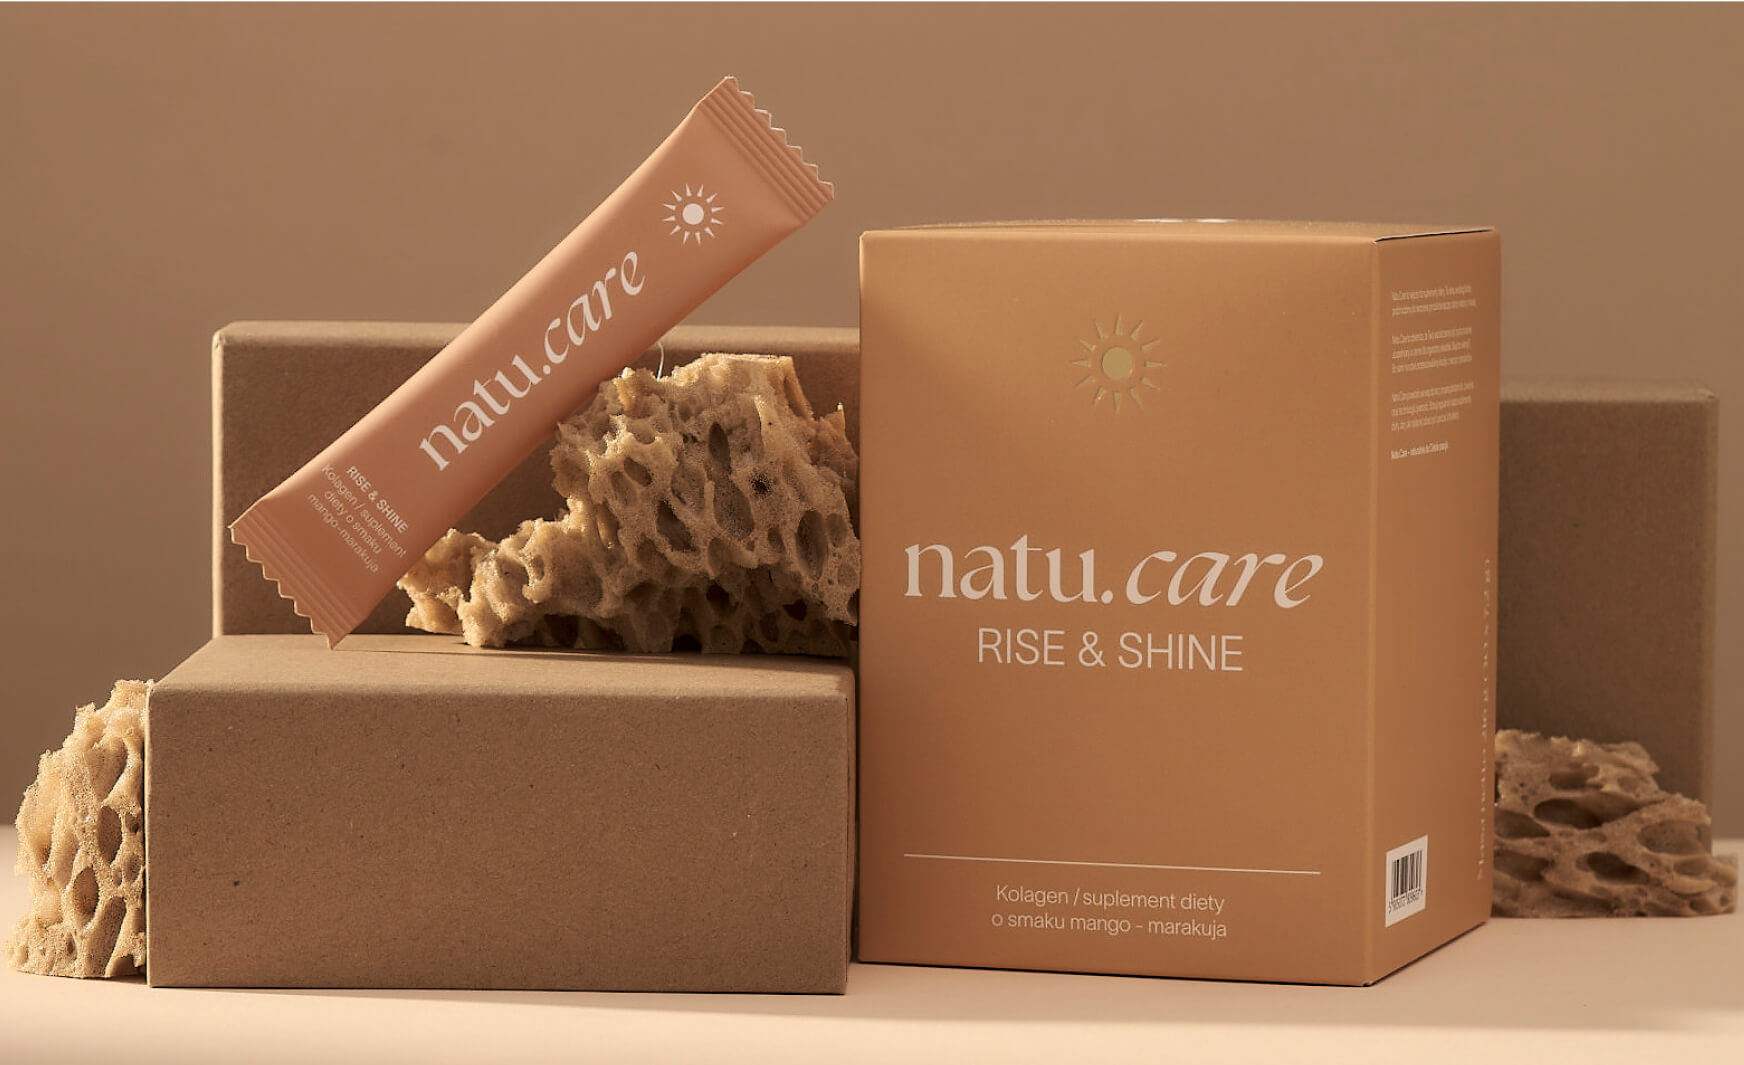 Natu.Care Collagen Premium 10 000 mg review (effects + ingredients)